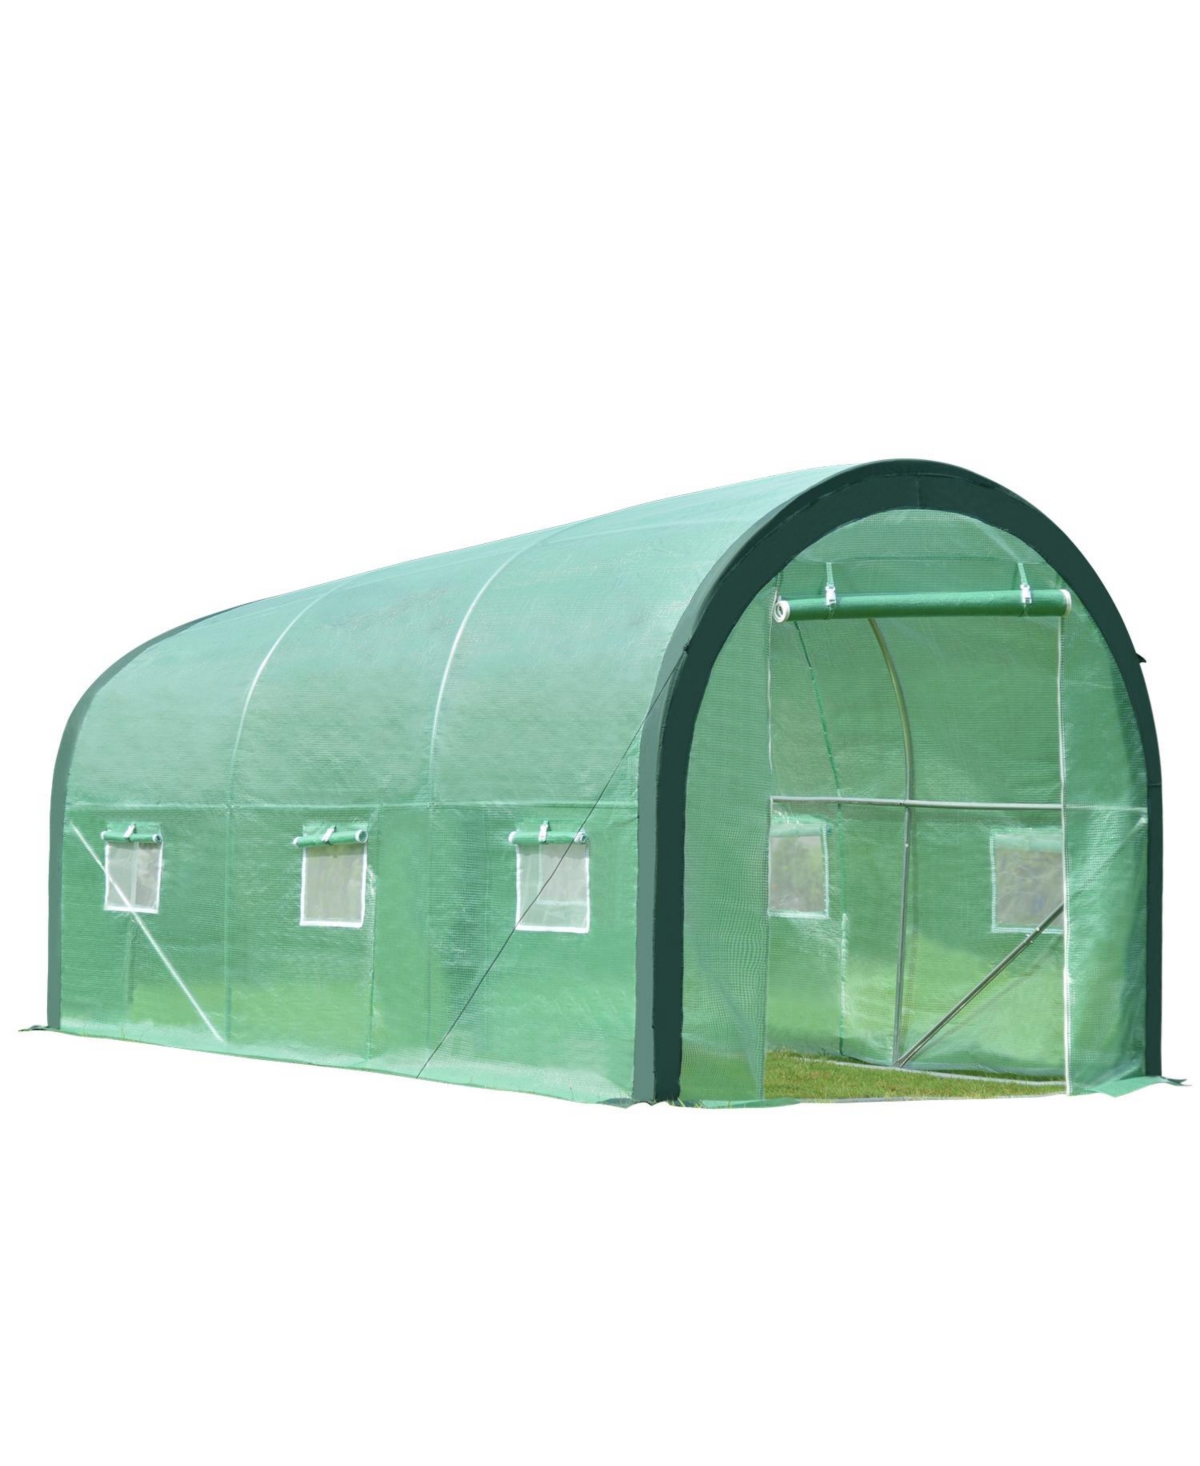 Walk-in Tunnel Greenhouse, Large Heavy Duty Gardening Plant House - White